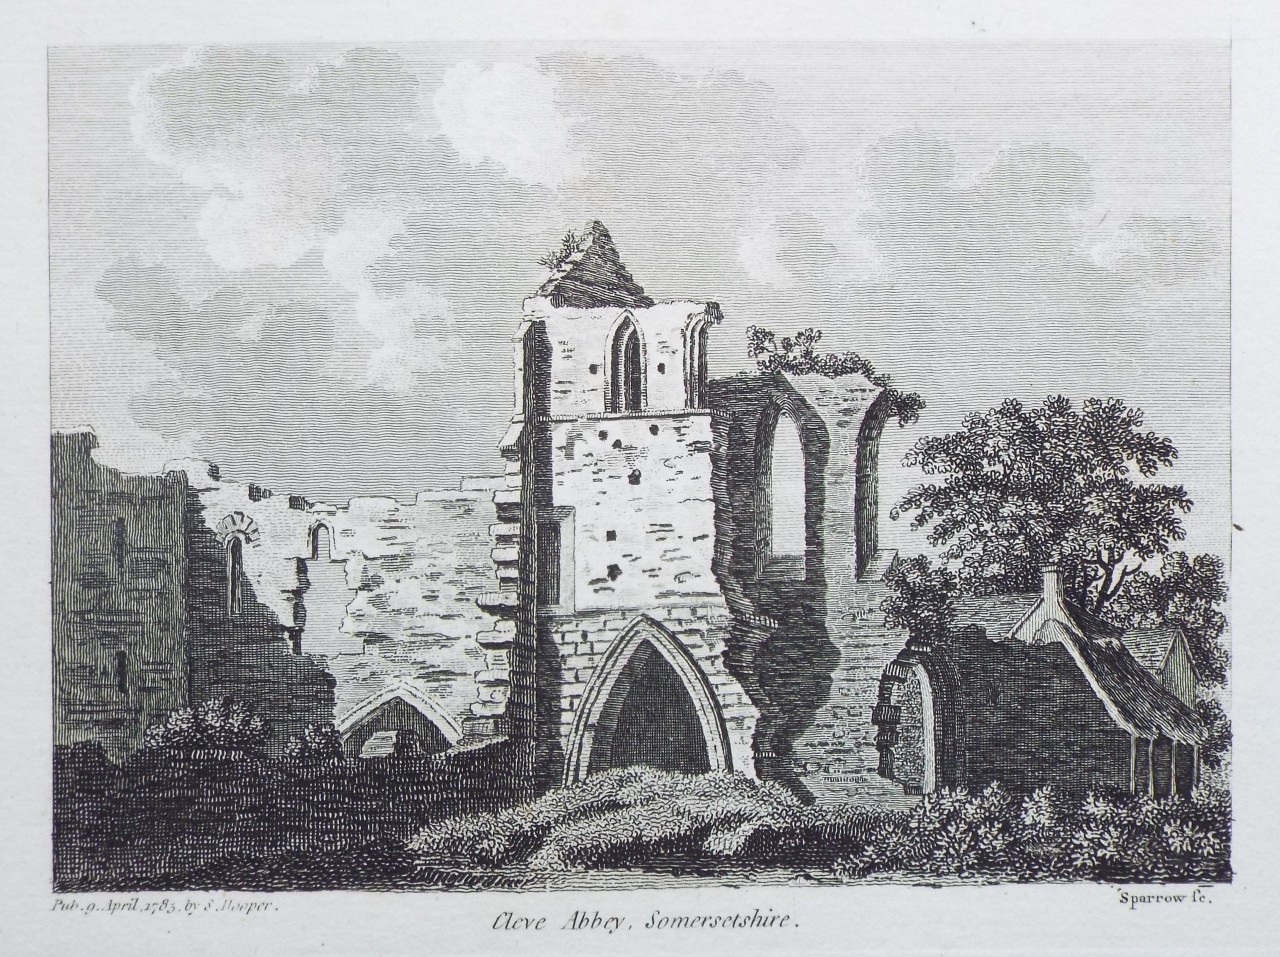 Print - Cleve Abbey, Somersetshire. - 